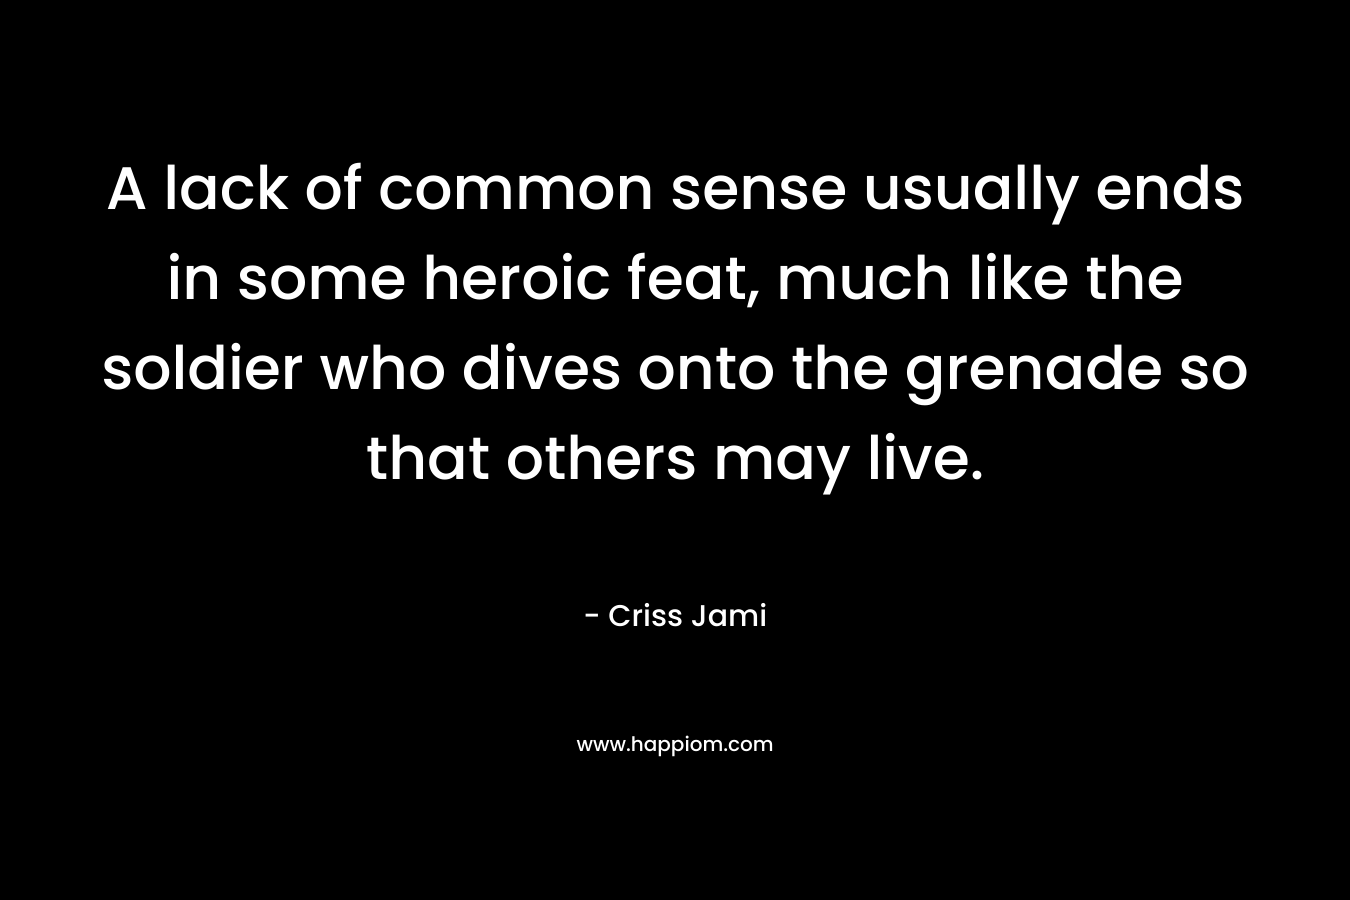 A lack of common sense usually ends in some heroic feat, much like the soldier who dives onto the grenade so that others may live.